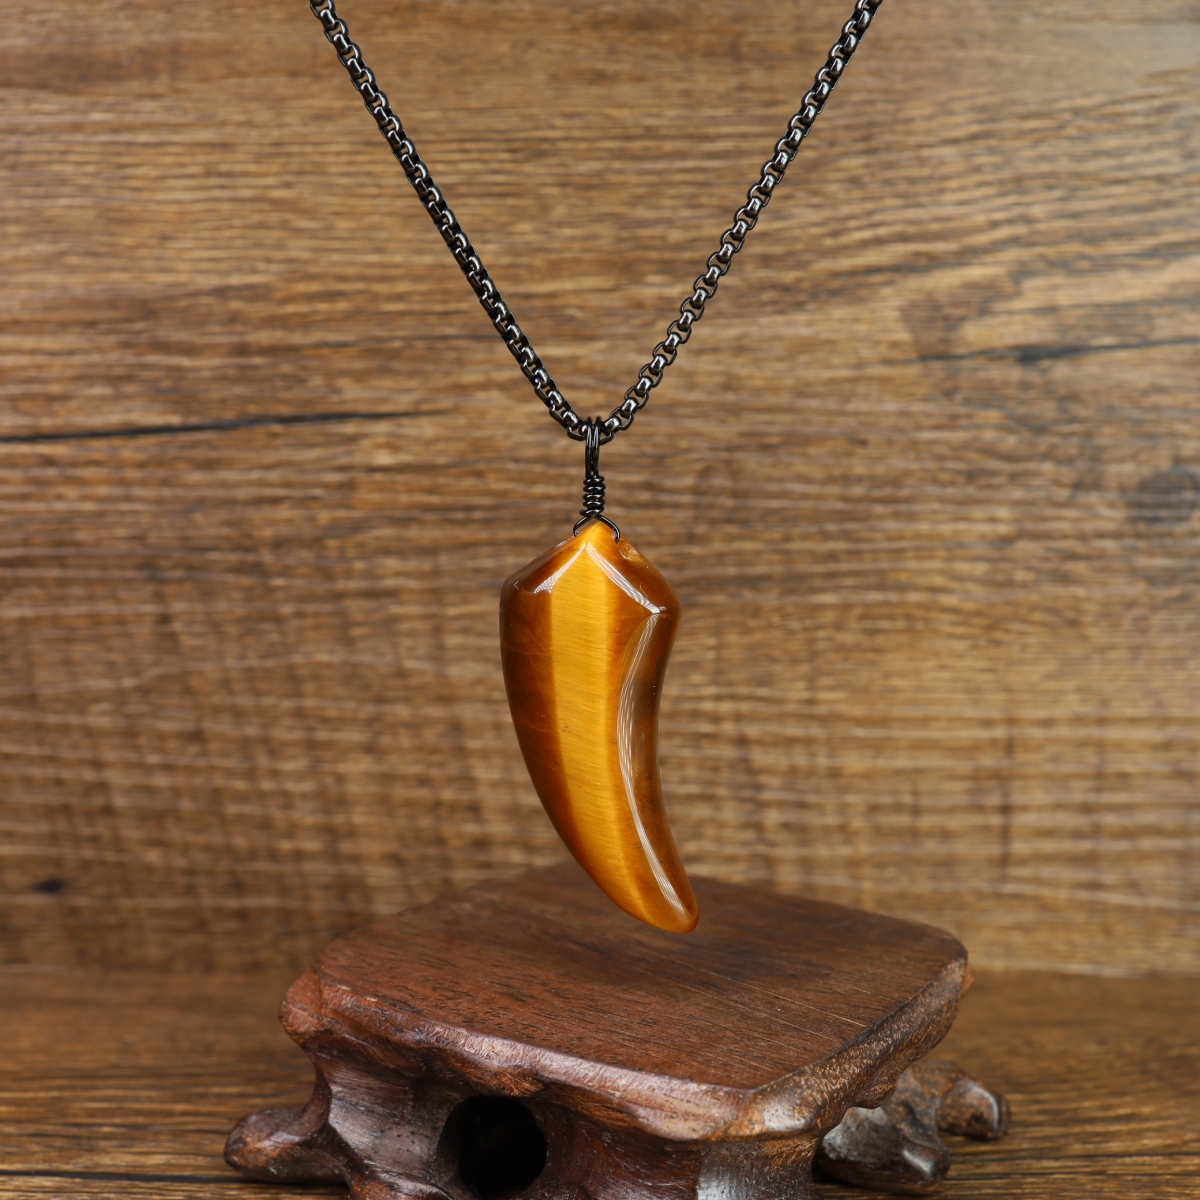 COAI Tiger Eye Wolf Tooth Spike Amulet Pendant Necklace for Men Women